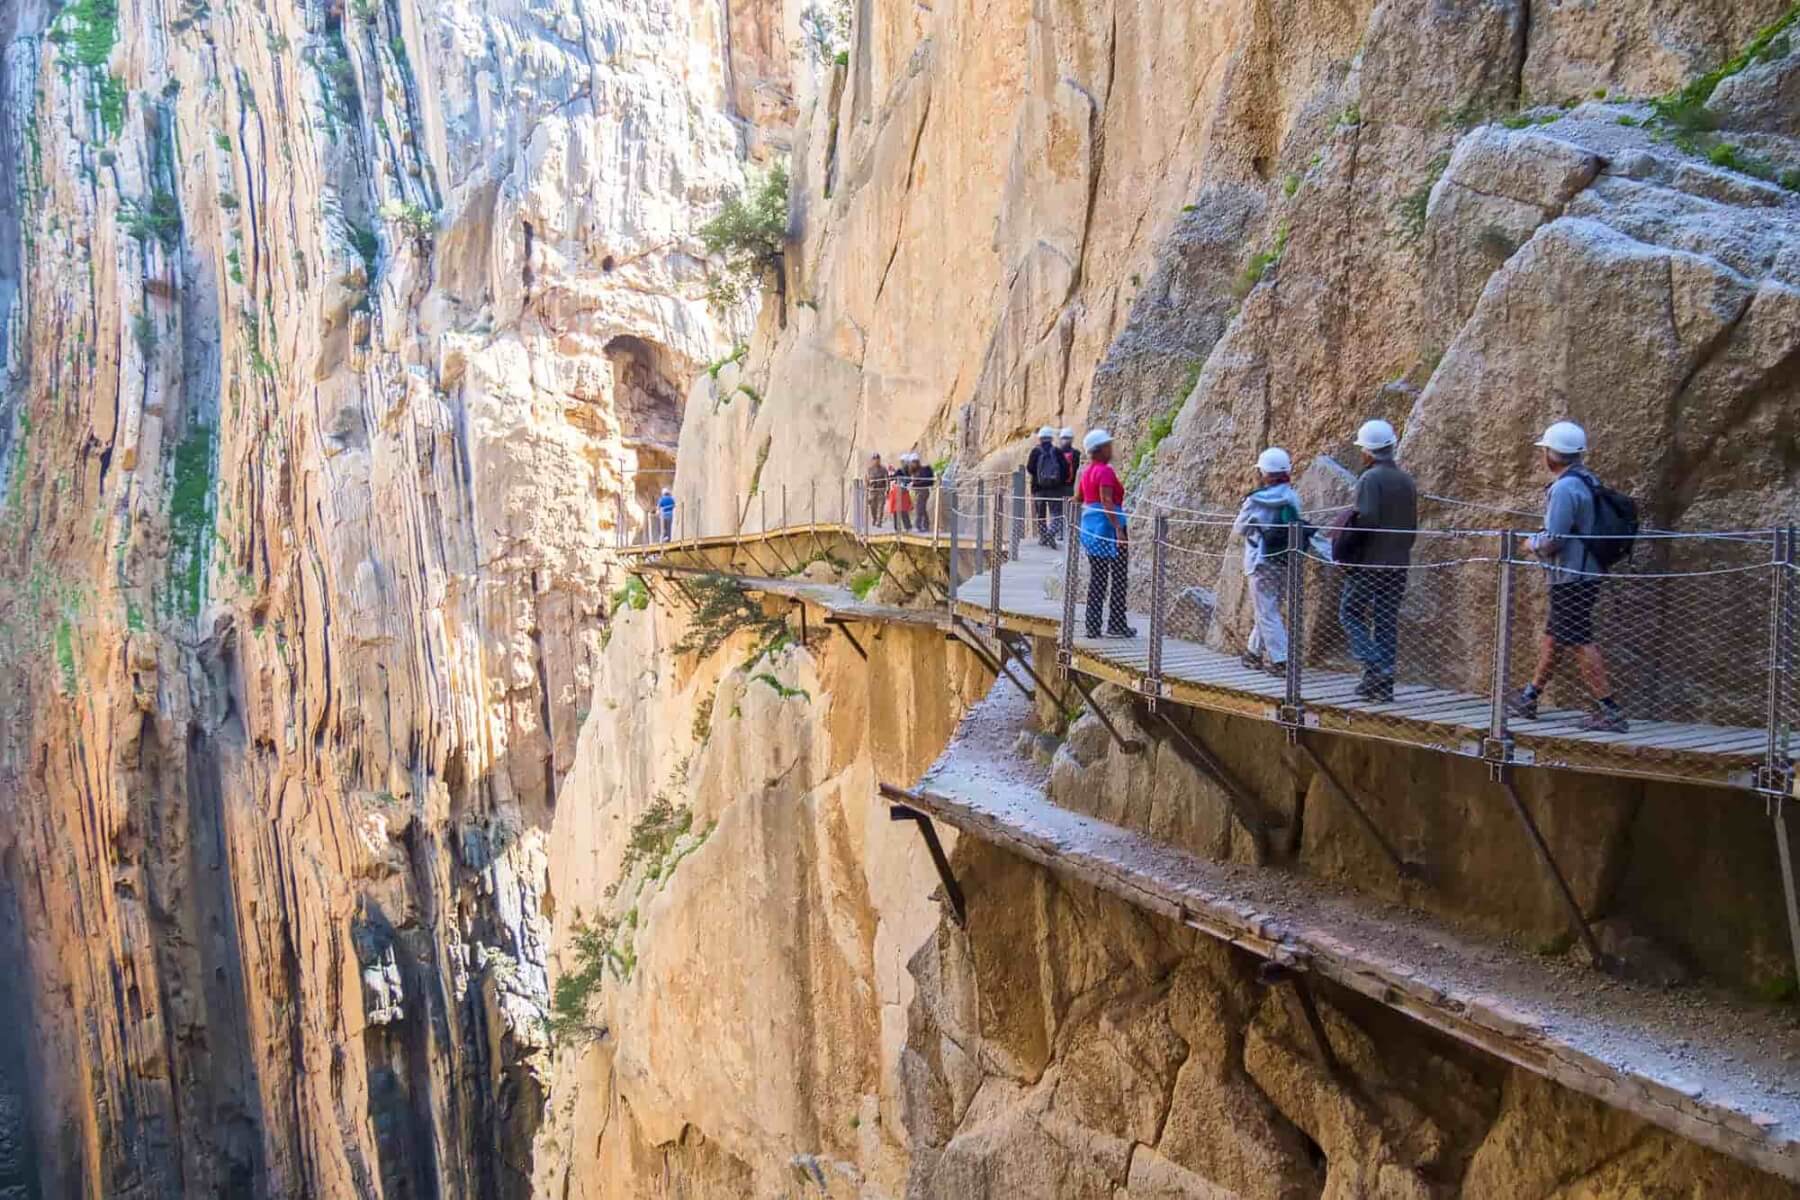 The old and new footpath of the Caminito del Rey